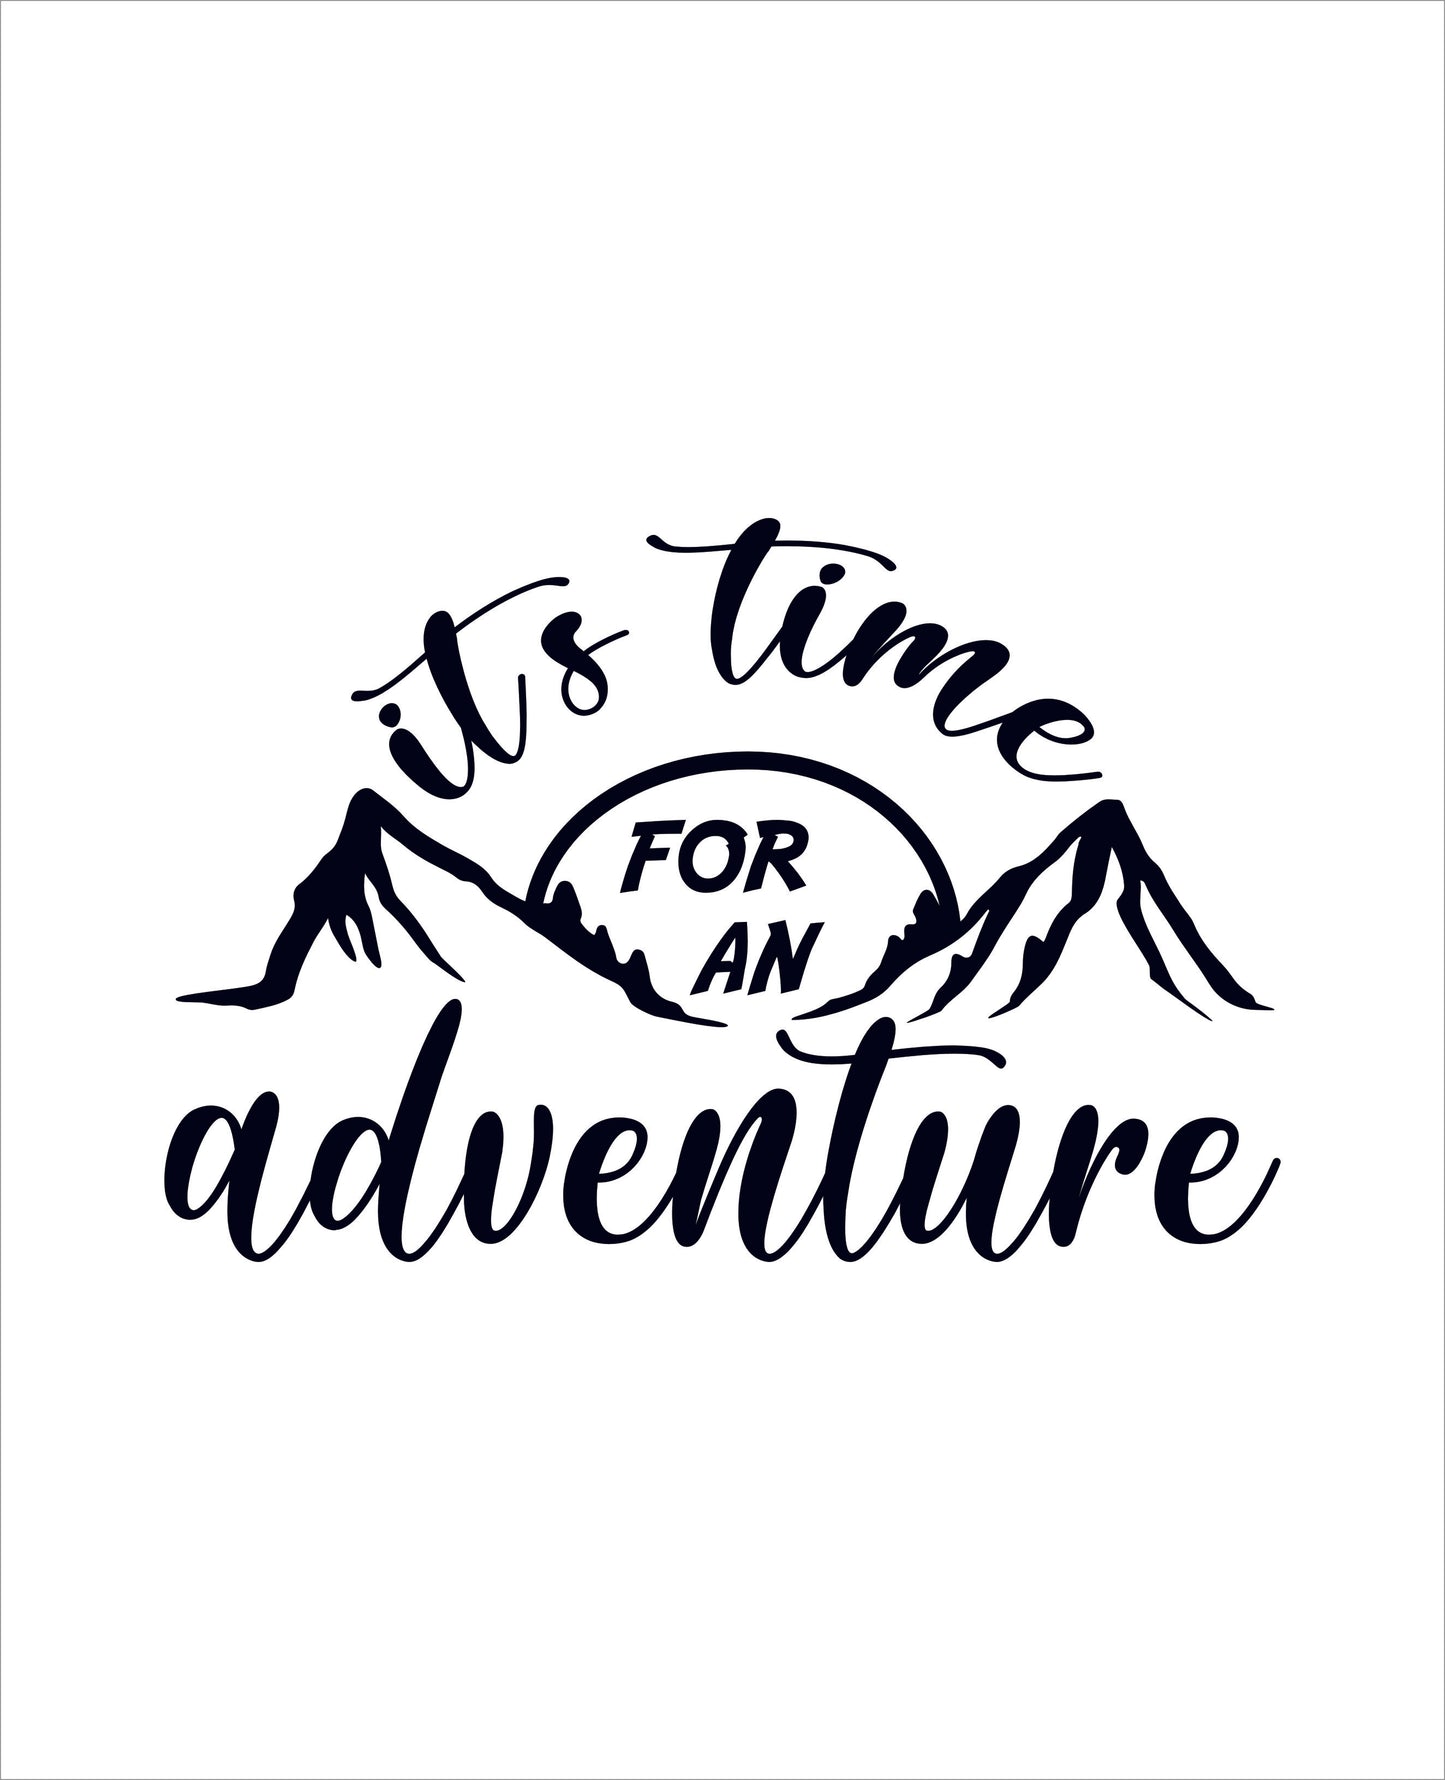 It's time for an Adventure camping Vinyl Sticker Decal Graphic | RV Slide Decal RV Door Decal Travel Trailer Camper